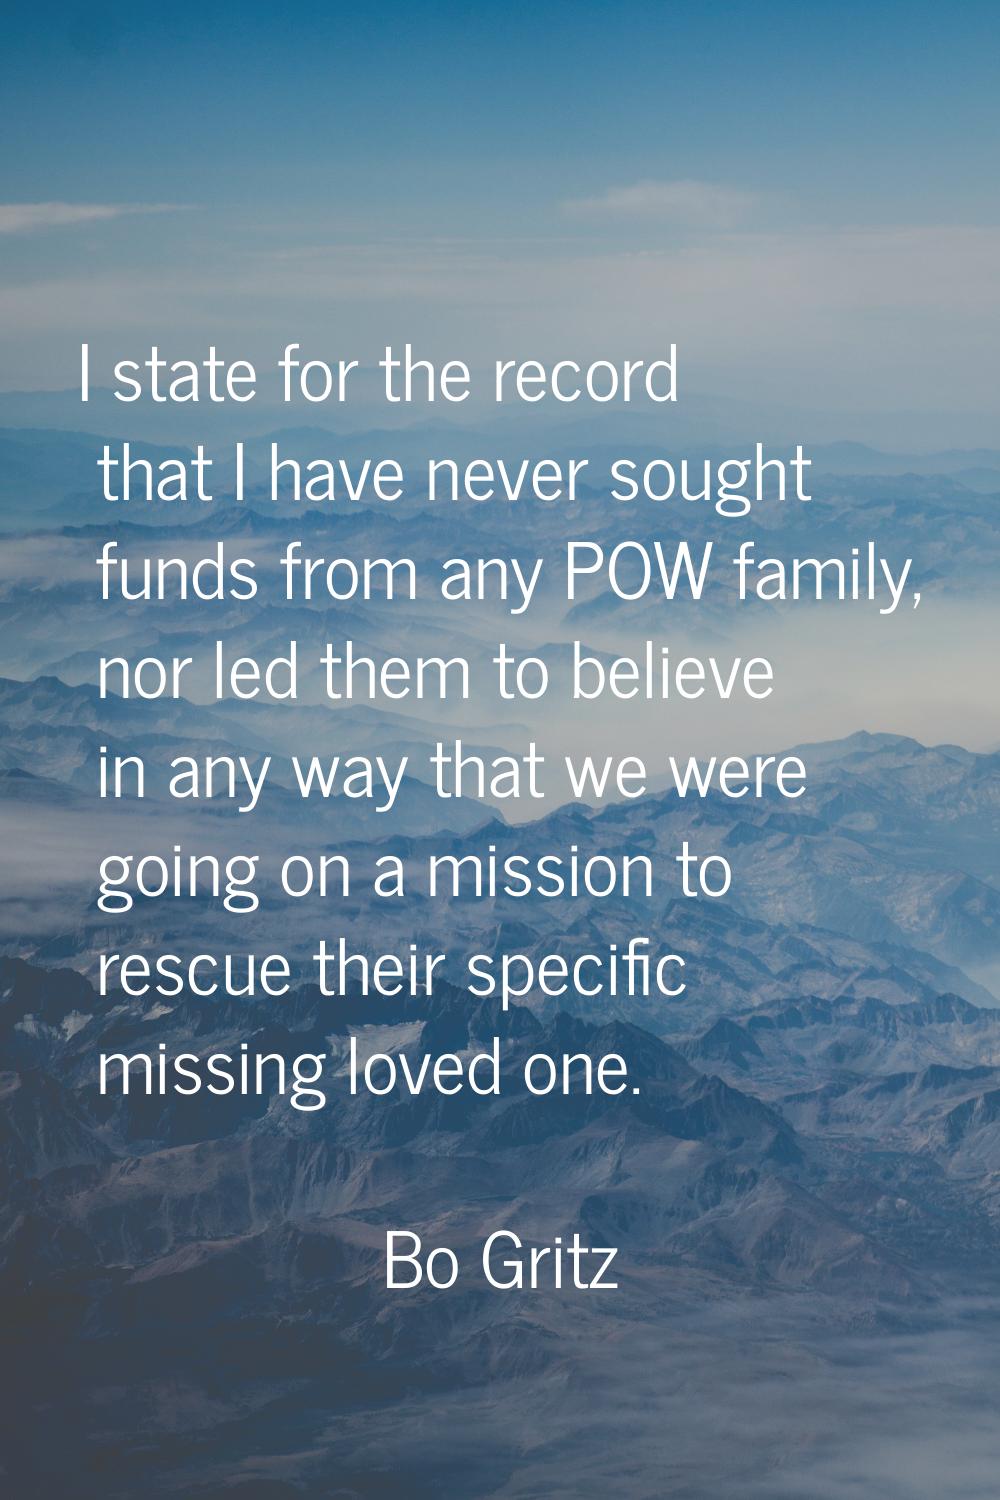 I state for the record that I have never sought funds from any POW family, nor led them to believe 